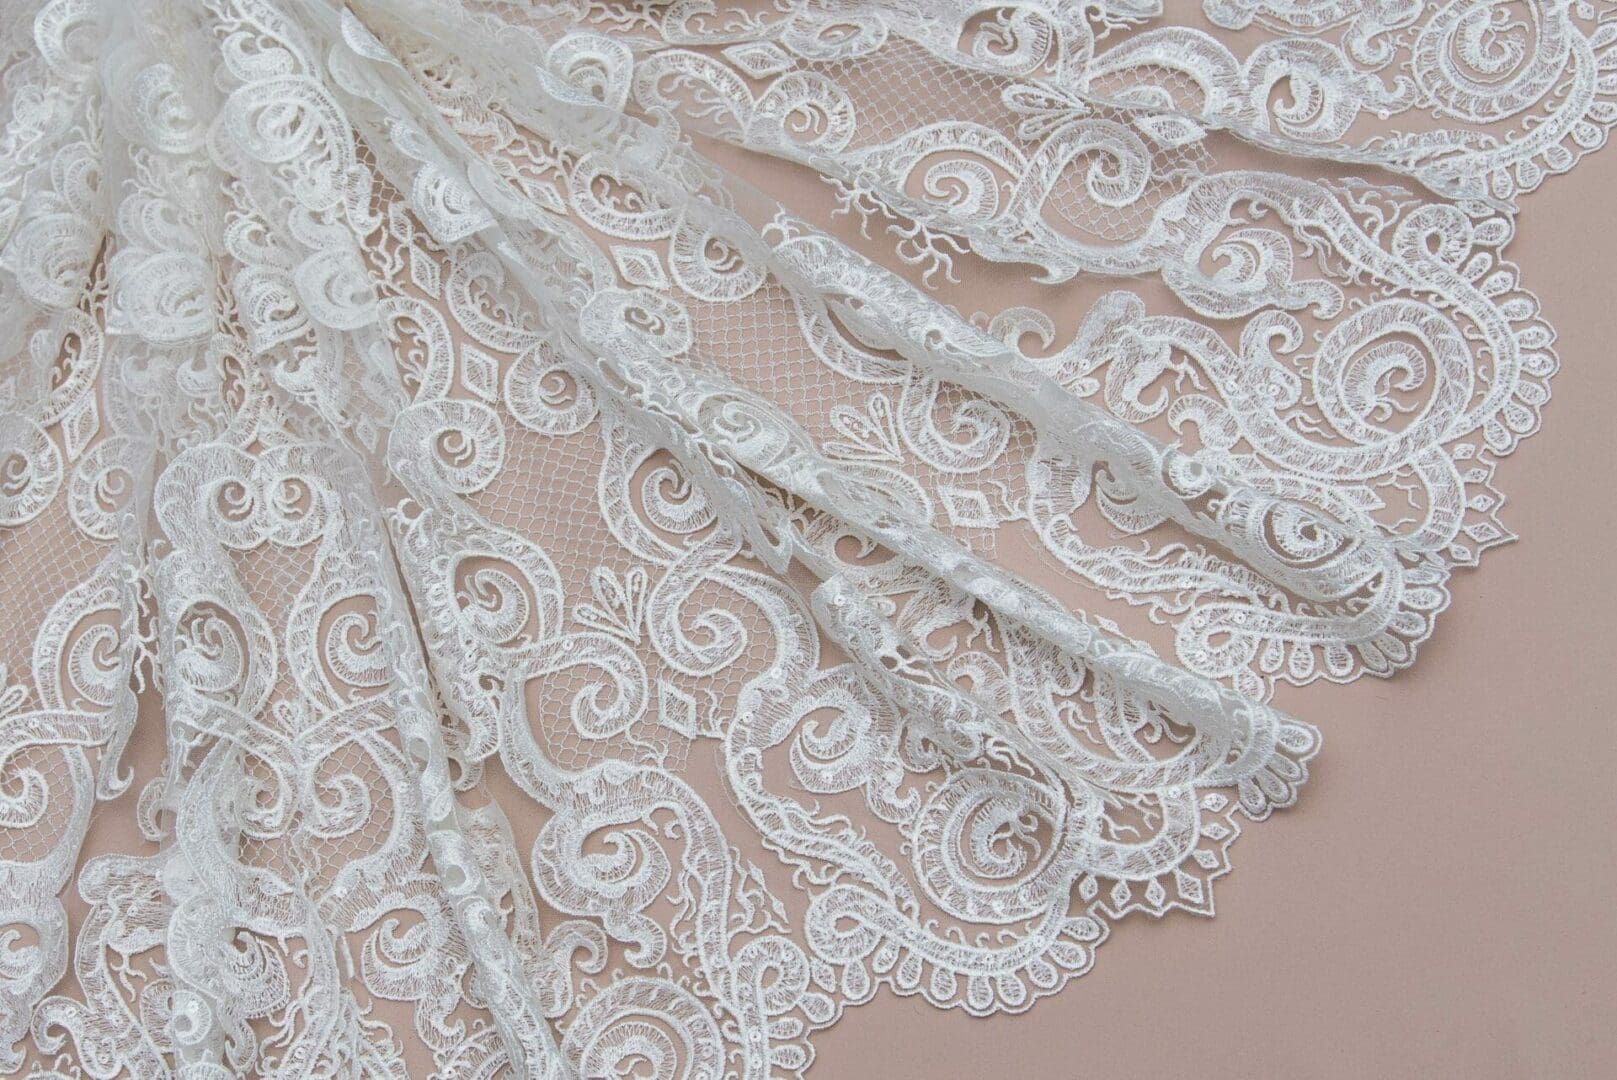 A close up of a white lace fabric.